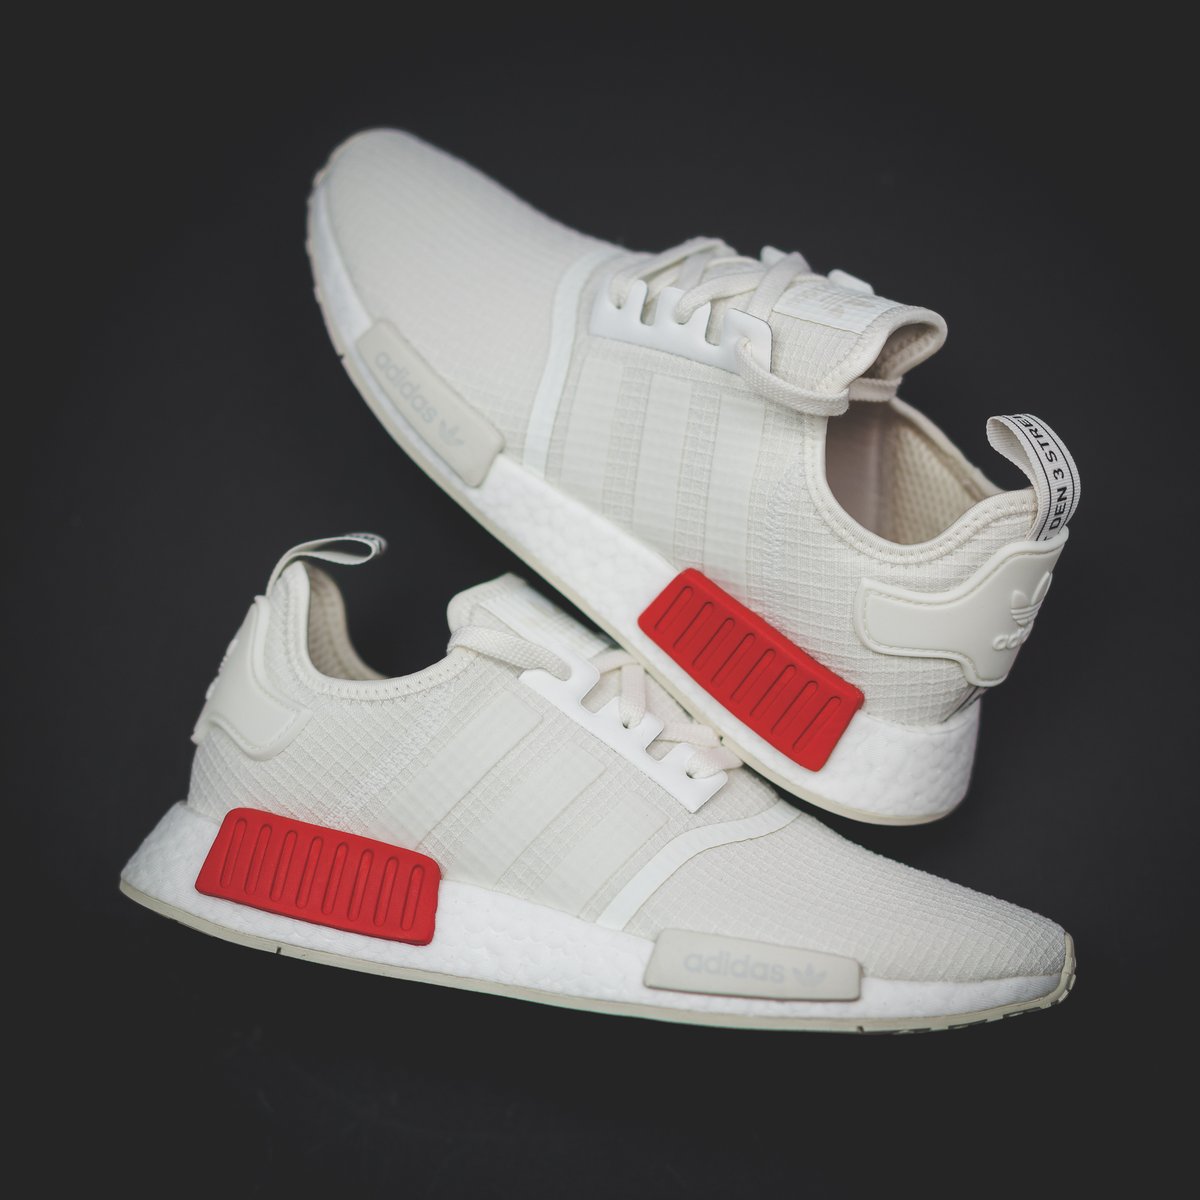 adidas Men 's NMD xr1 winter fitness shoesred Amazon